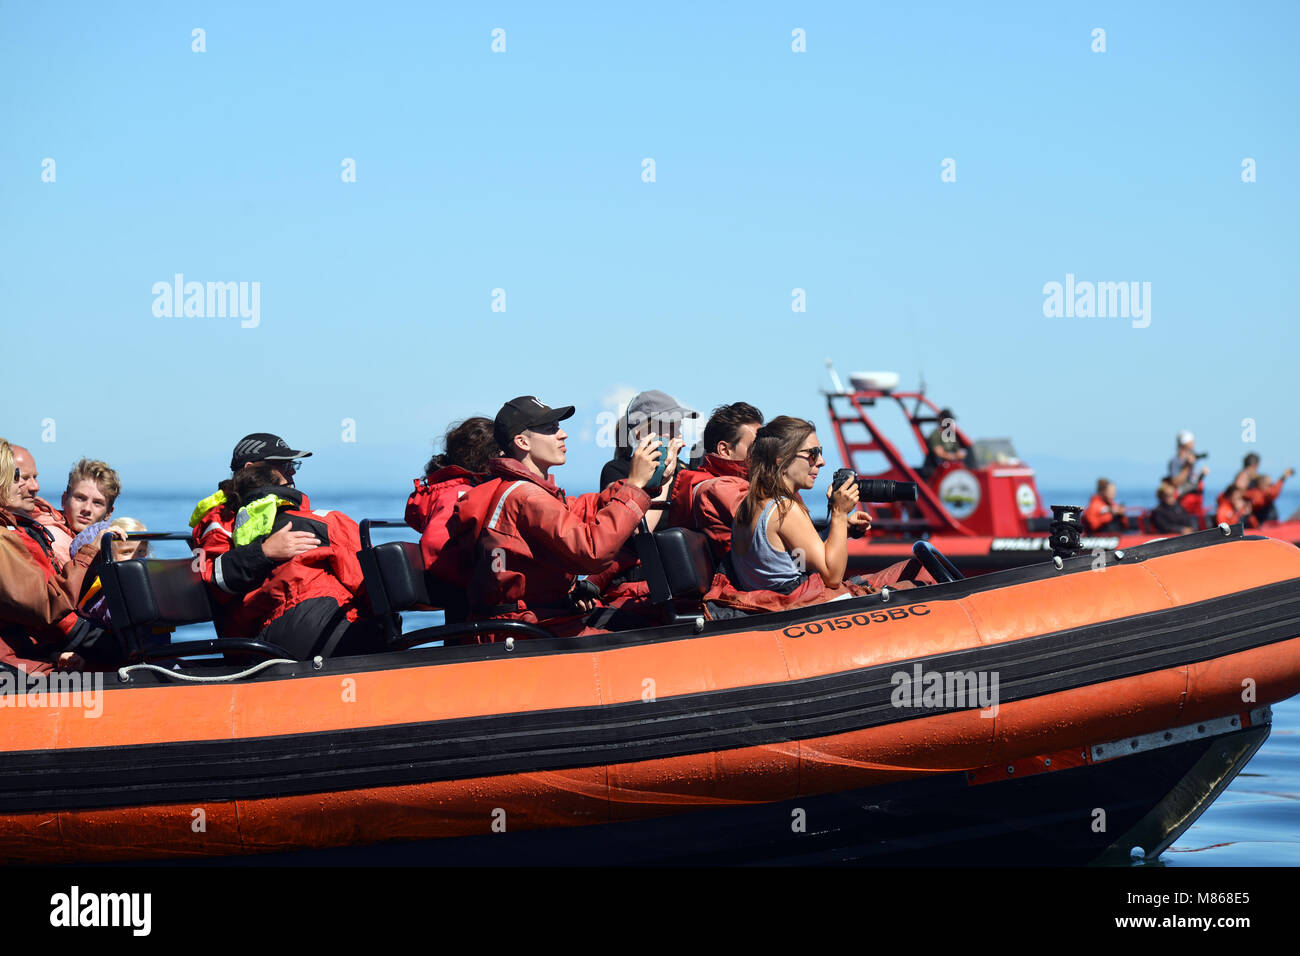 Speed boat full of tourists going Whale watching off the coast of Vancouver Island, British Columbia, Canada. Stock Photo